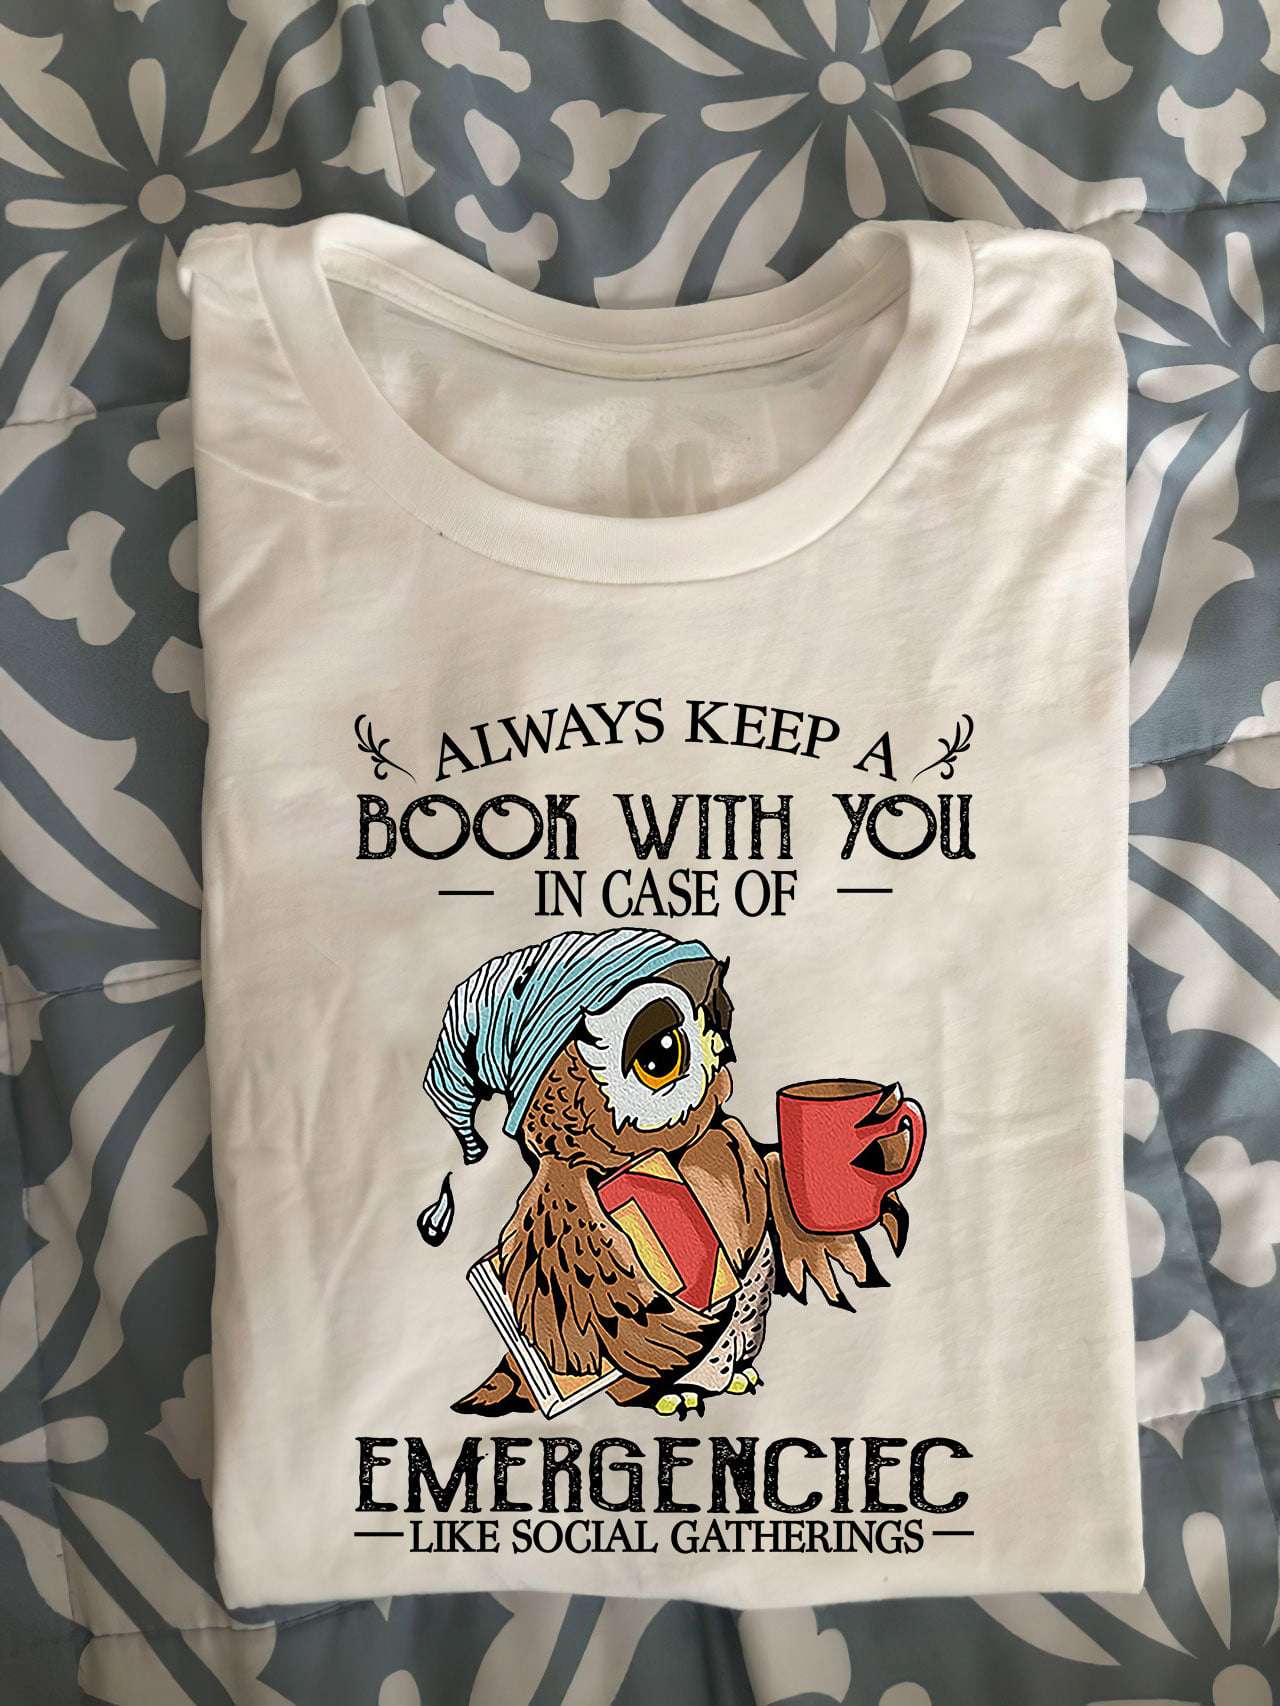 Always keep a book with you in case of emergenciec like social gatherings - Social distancing